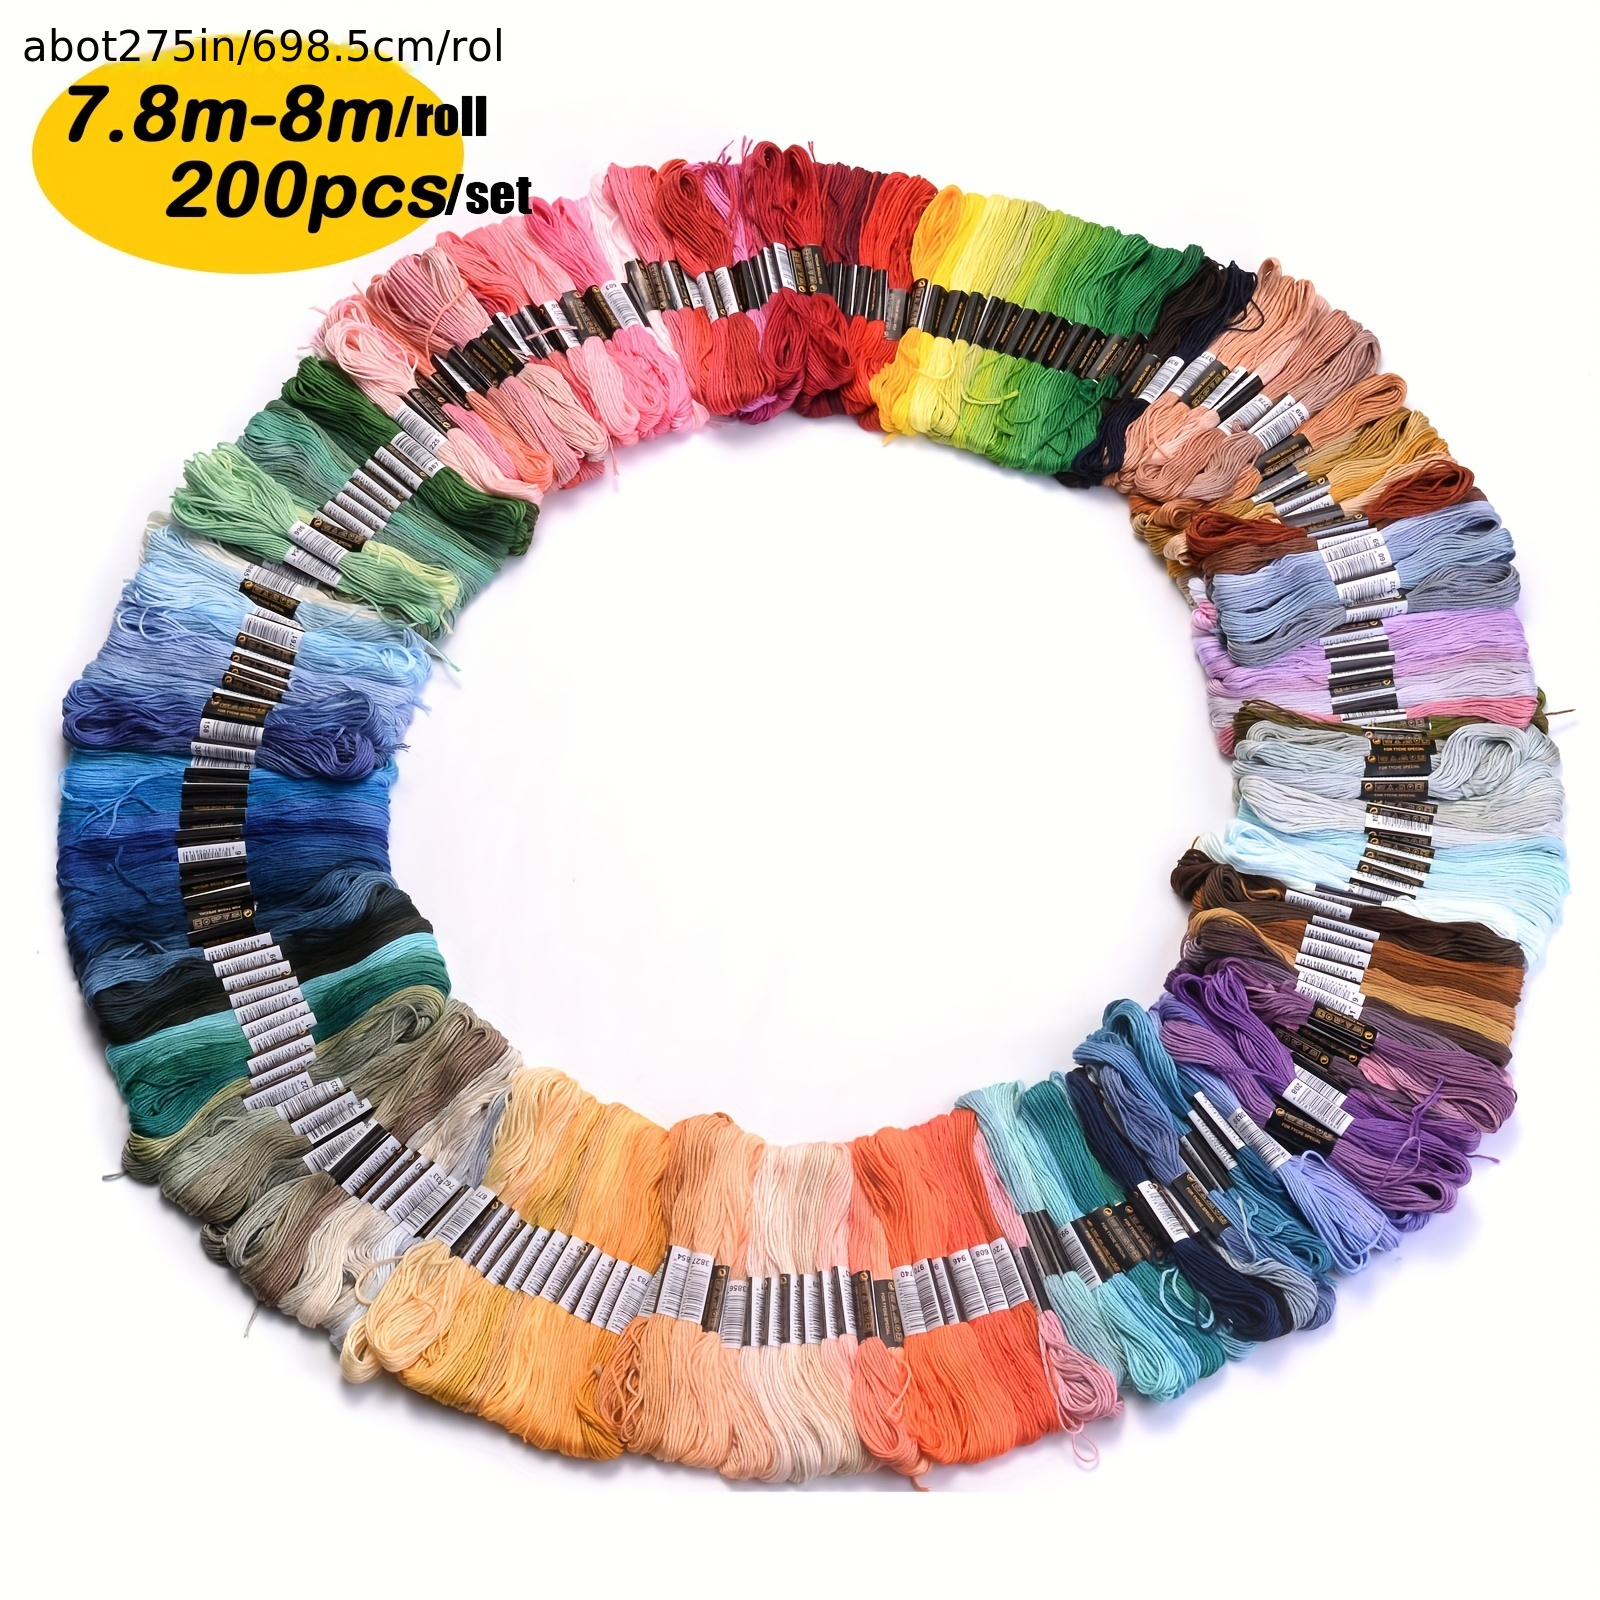 Embroidery Floss Rainbow Color, 250 Skeins Friendship Bracelet String Kit  with